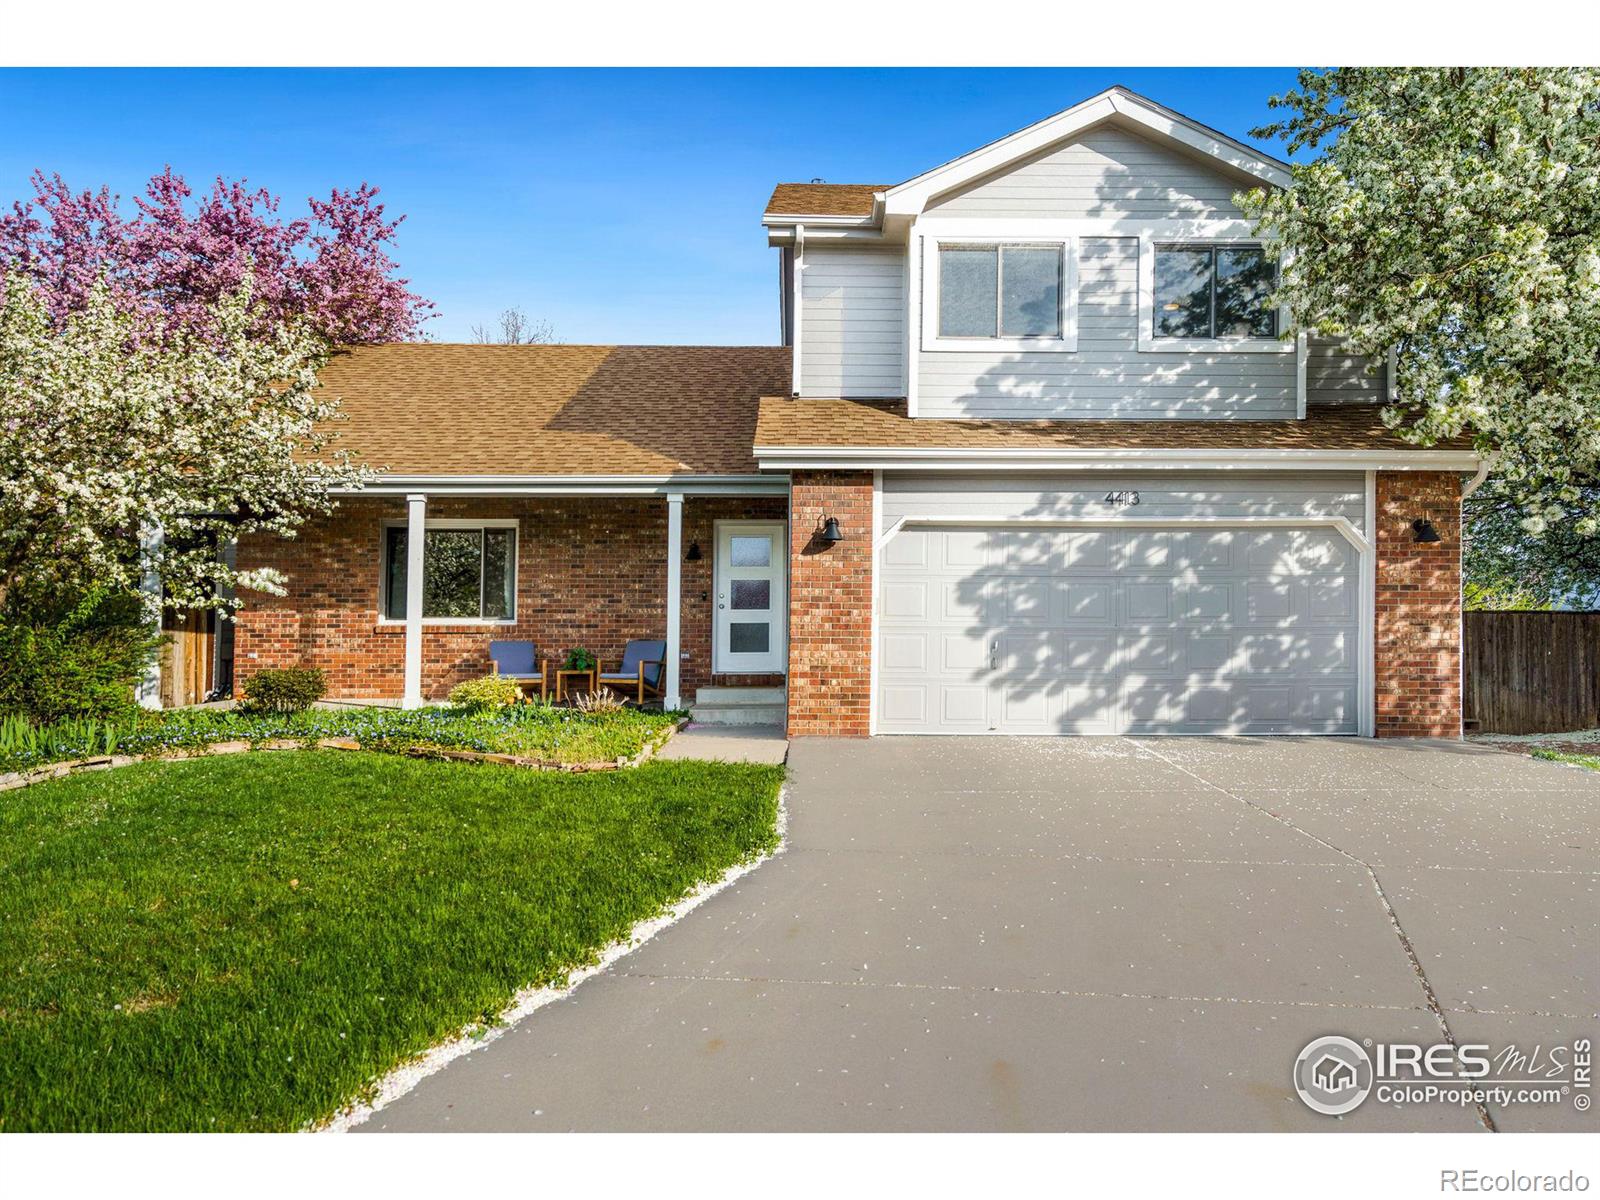 4413  Viewpoint Court, fort collins MLS: 4567891008319 Beds: 3 Baths: 4 Price: $699,000